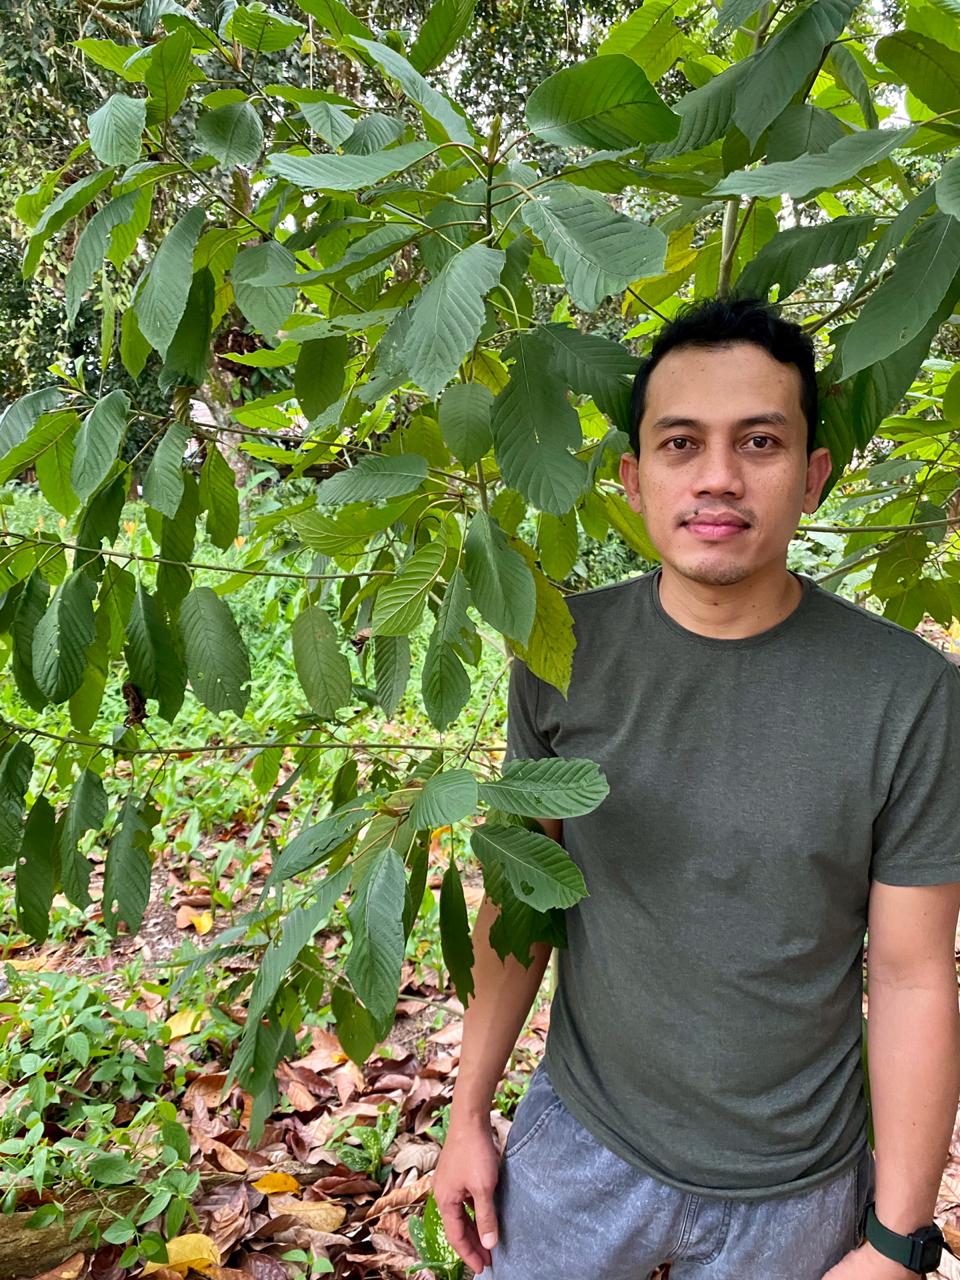 The journey of kratom from tree to product